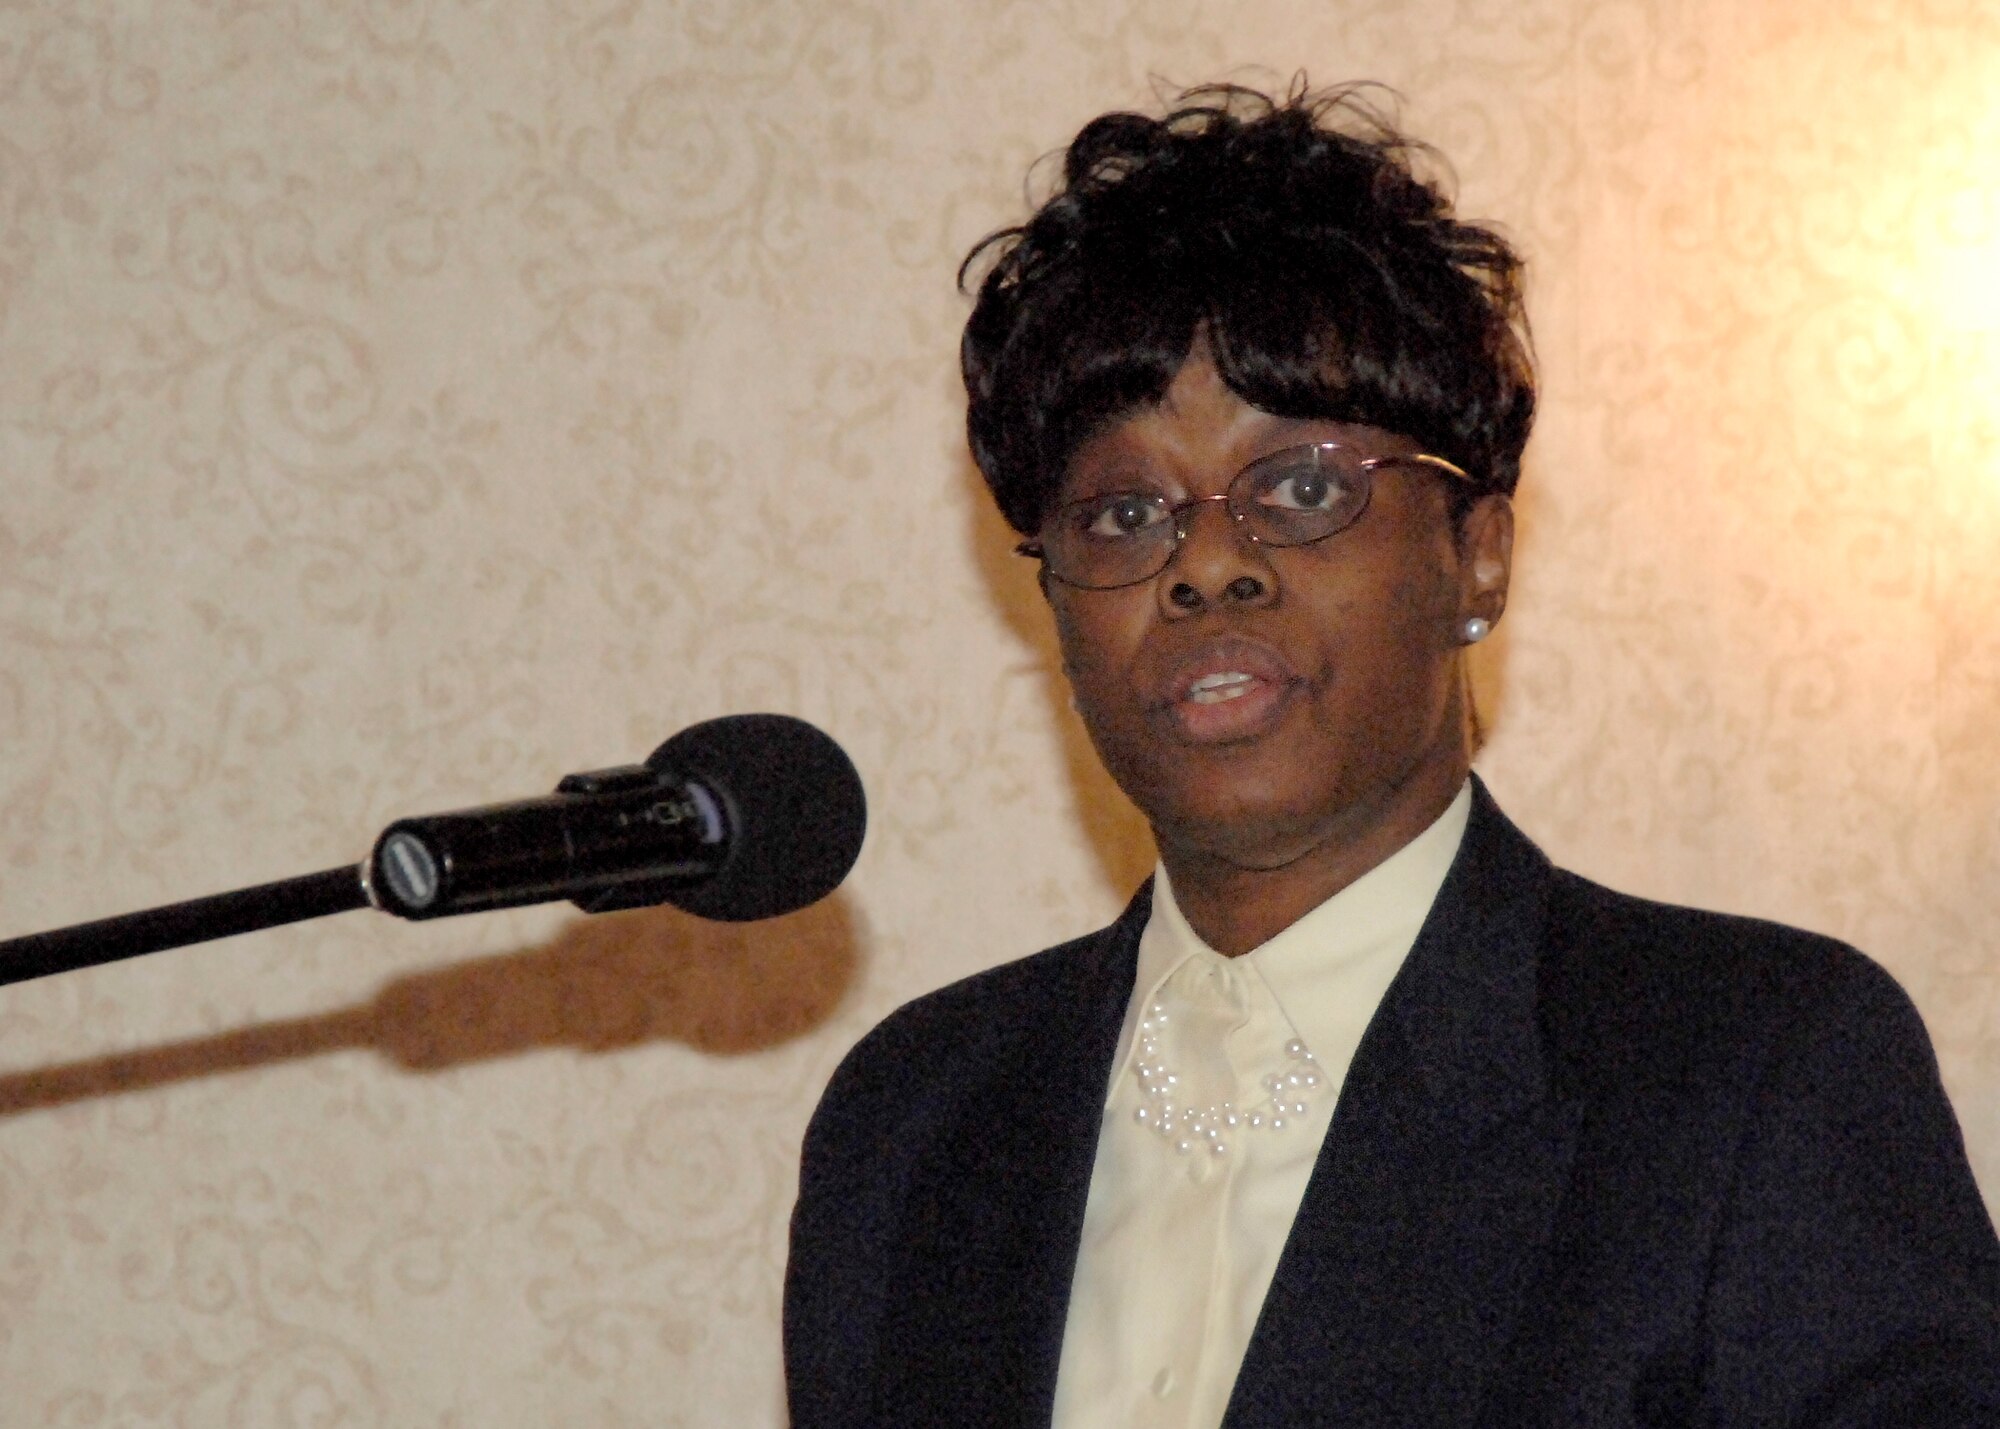 Dr. Wanda Austin, president and chief executive officer of The Aerospace Corporation, was the featured speaker at the annual Martin Luther King Day luncheon, Jan. 30. (Photo by Lou Hernandez)